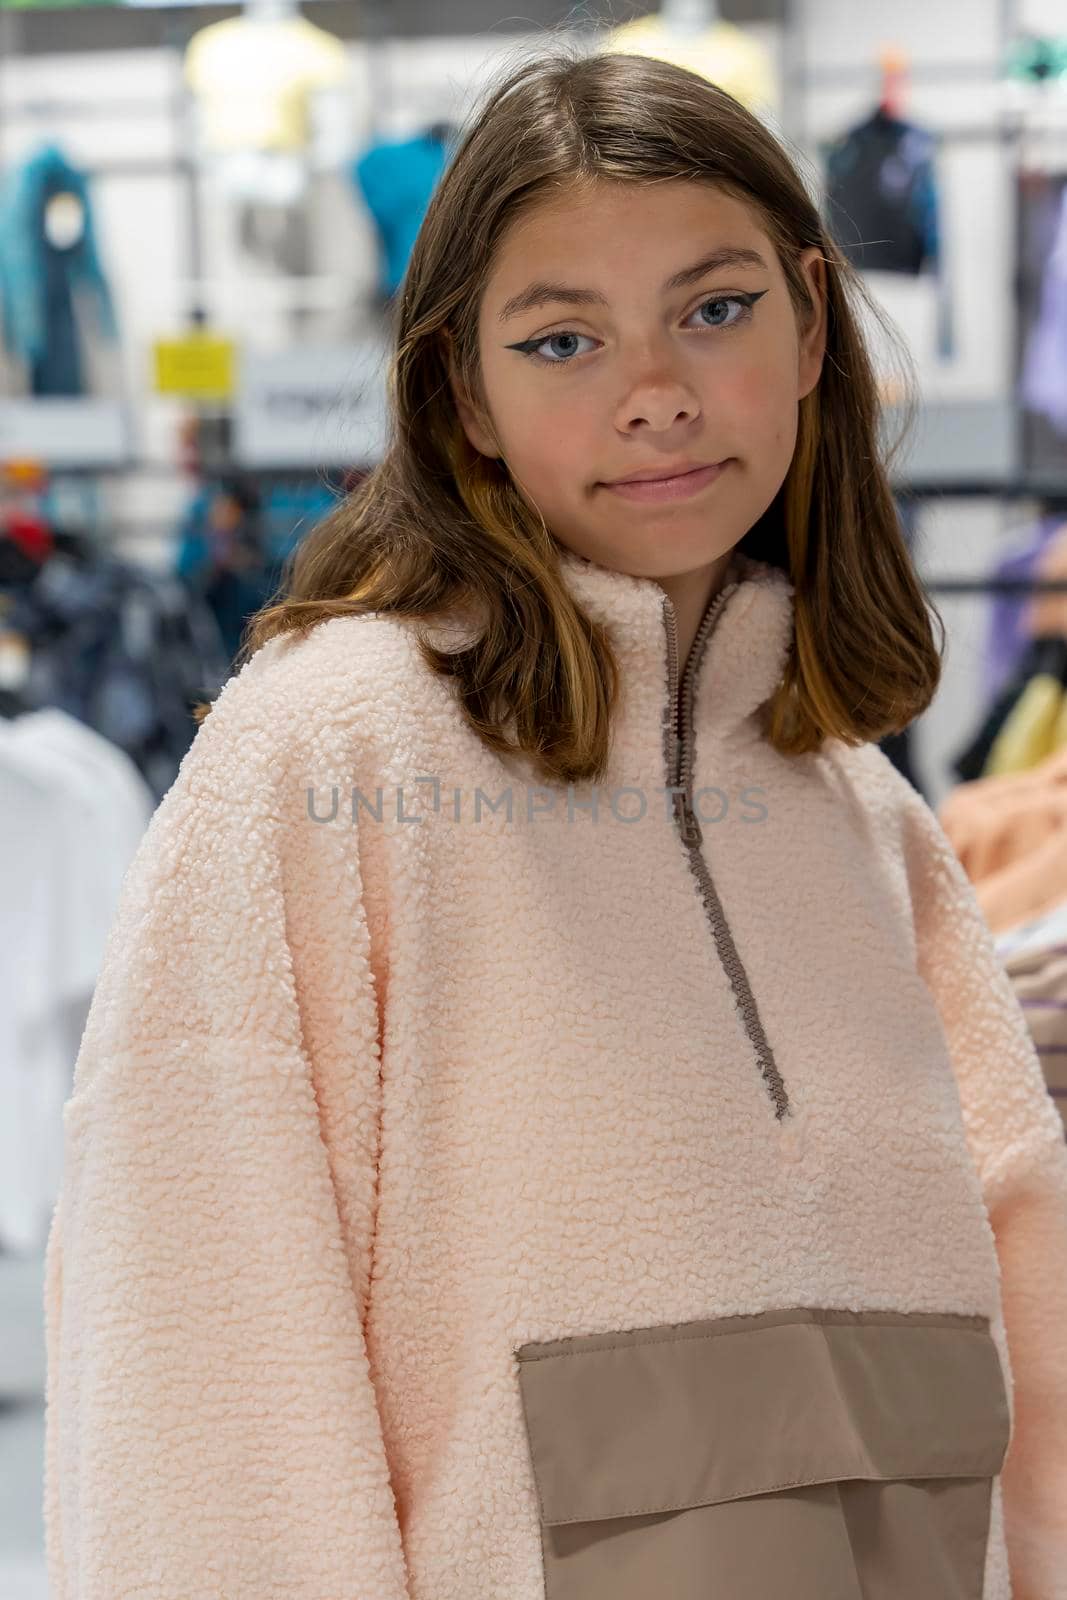 a happy beautiful girl in a clothing store tries on a fashionable sweatshirt and looks at the camera with a smile . shopping, fashion, style